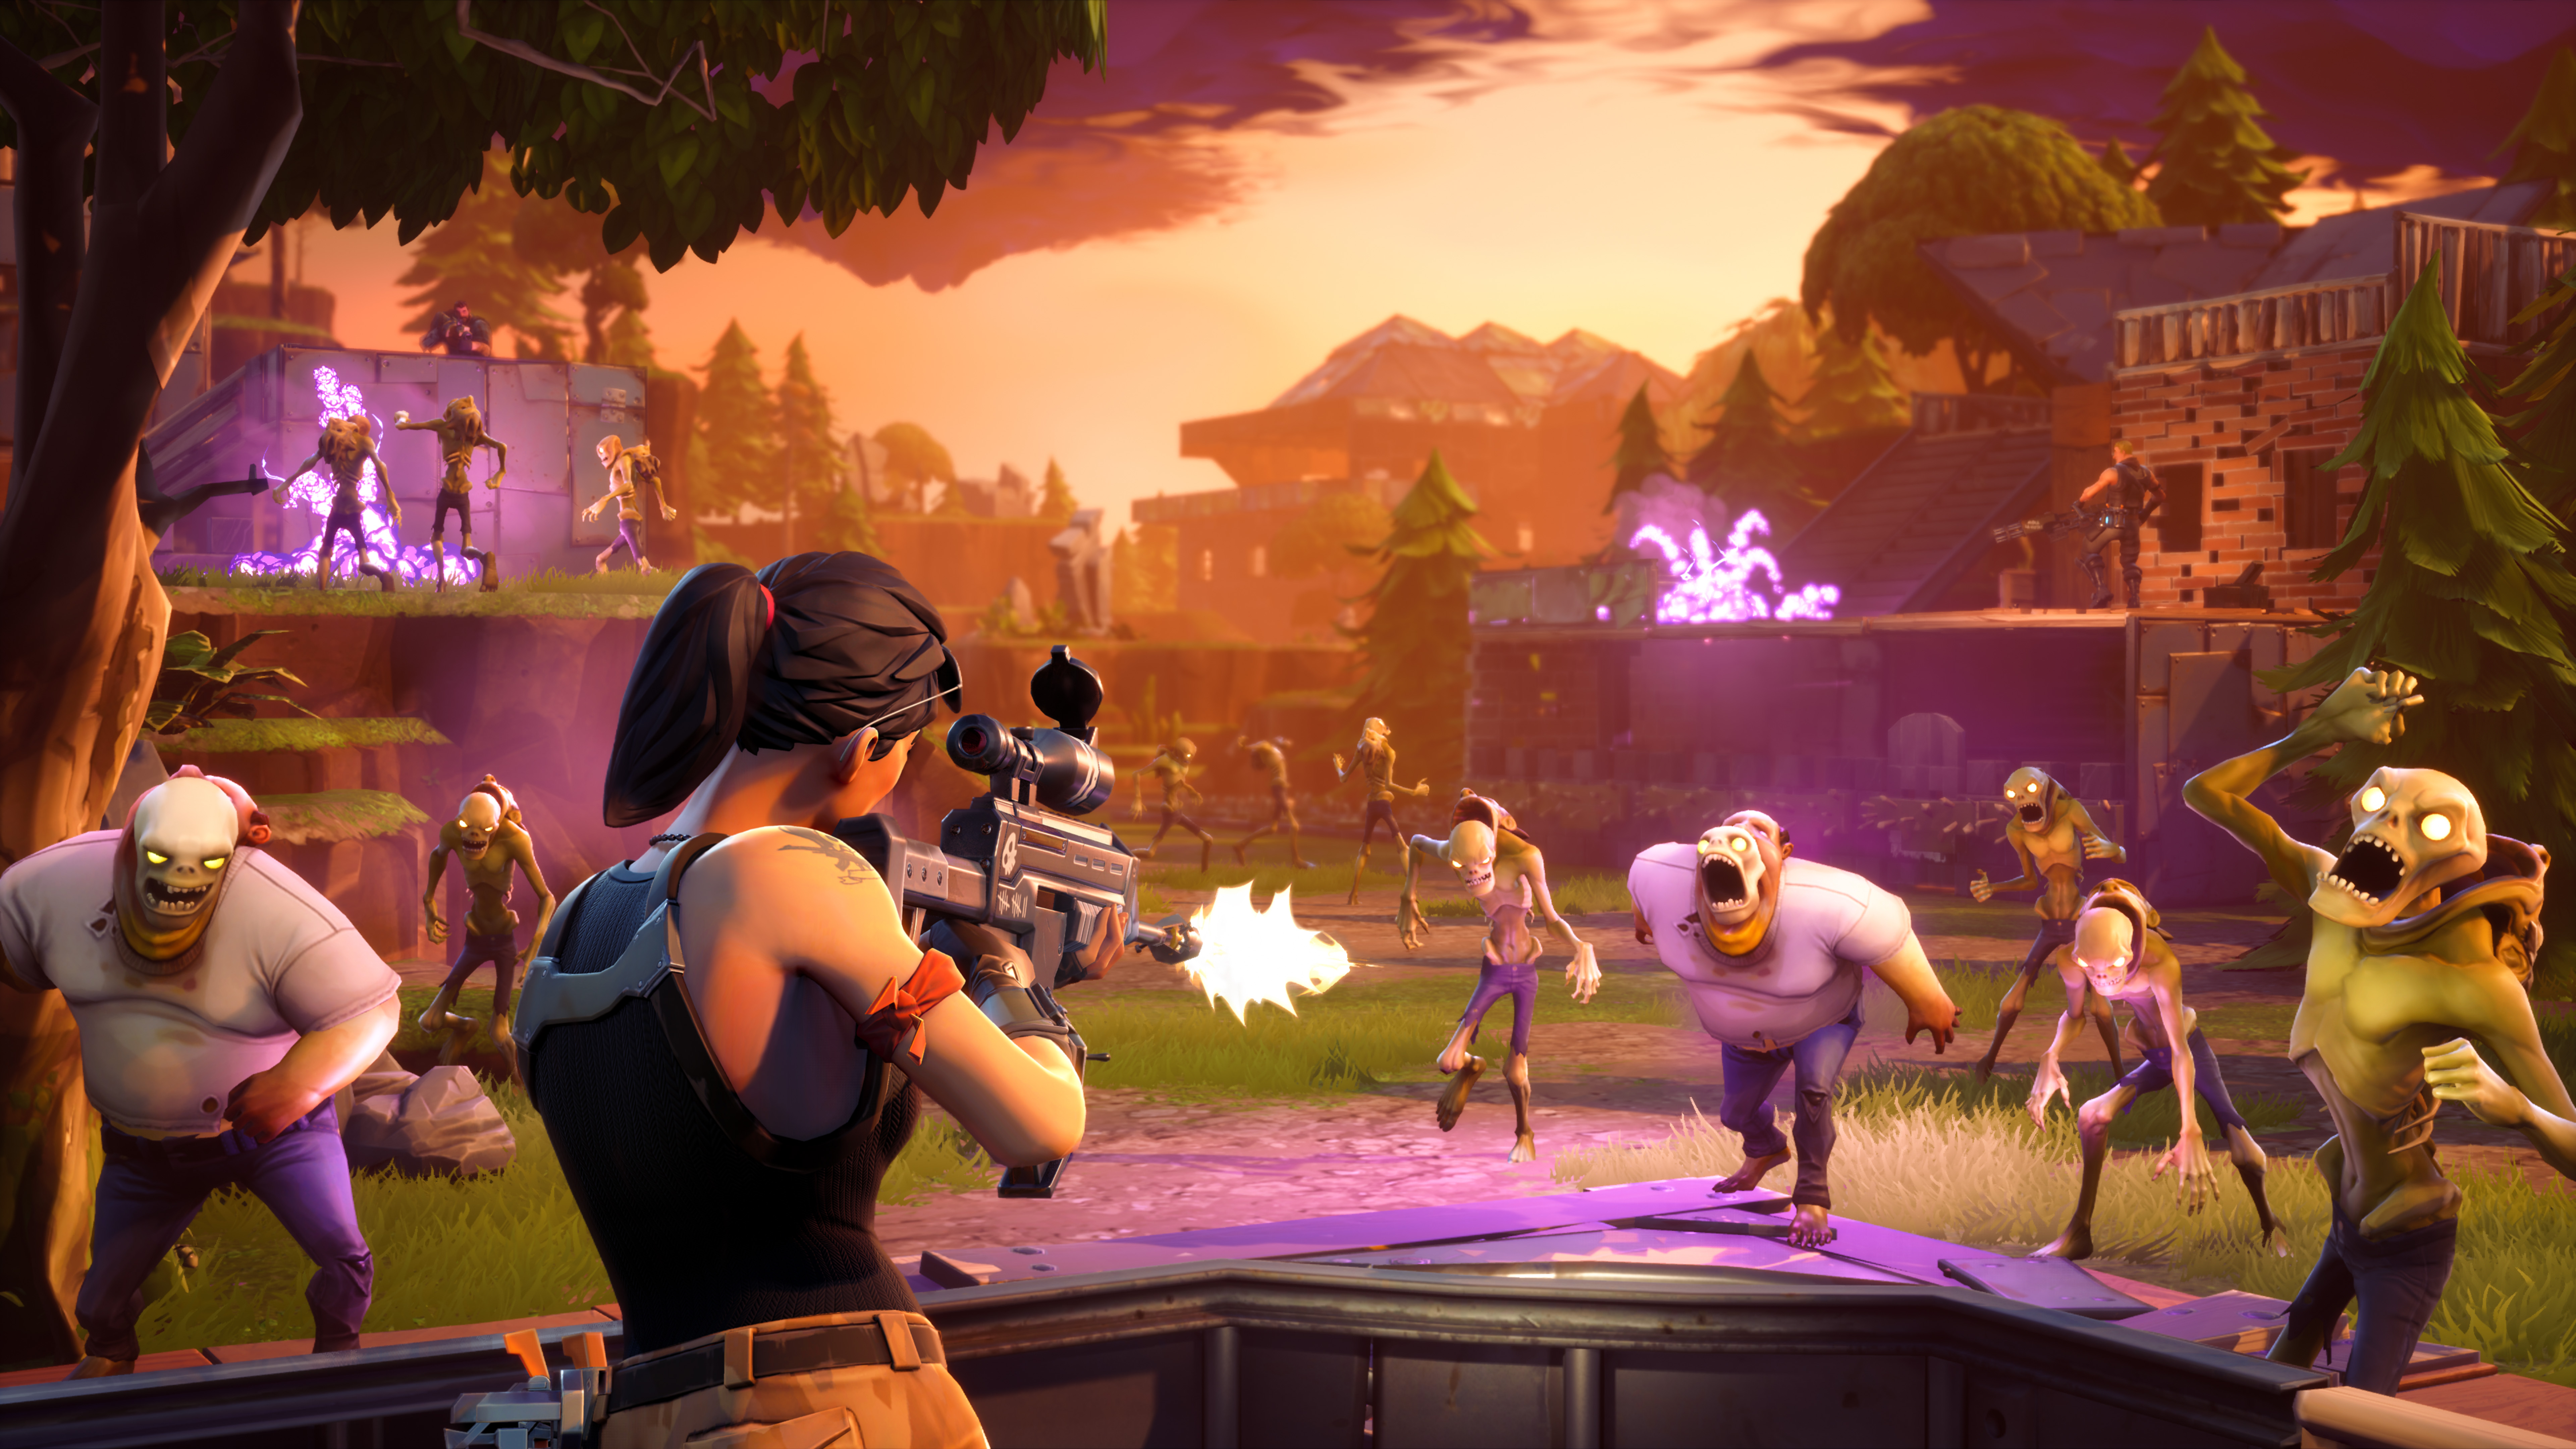 enlarge at its best fortnite looks and feels like this nicely staged promo pic of in game action however so many free to play annoyances drag this - fortnite p2w